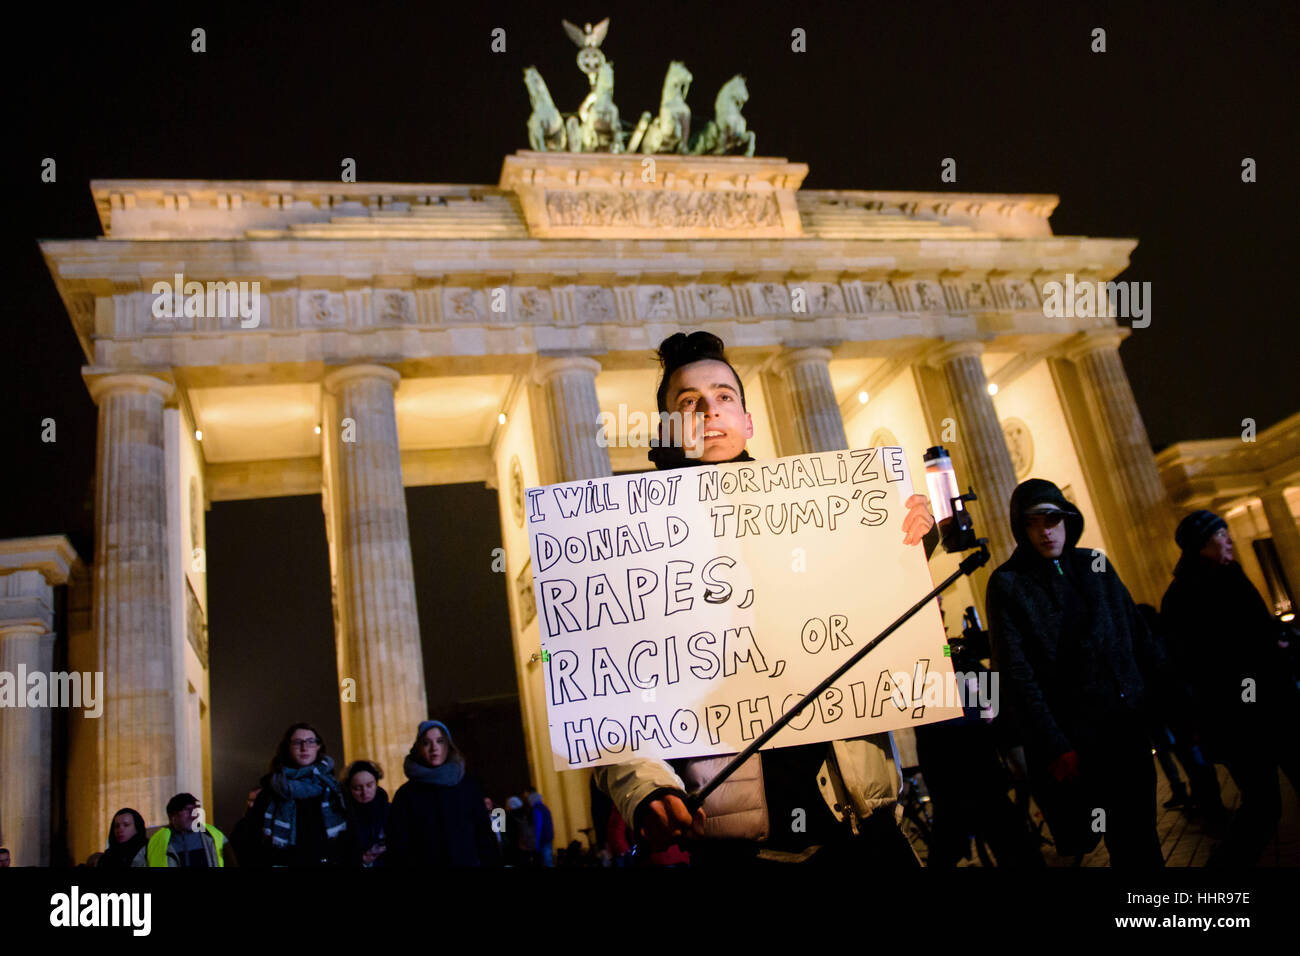 Berlin, Germany. 20th Jan, 2017. A protestor at the demonstration 'Nein zum weltweiten Trumpismus' (lt. No to worldwide Trumpism) from the initiative 'The Coalition' with a placard reading 'I will not normalize Donald Trump's rapes, racism, or homophobia' in Berlin, Germany, 20 January 2017. Photo: Gregor Fischer/dpa/Alamy Live News Stock Photo